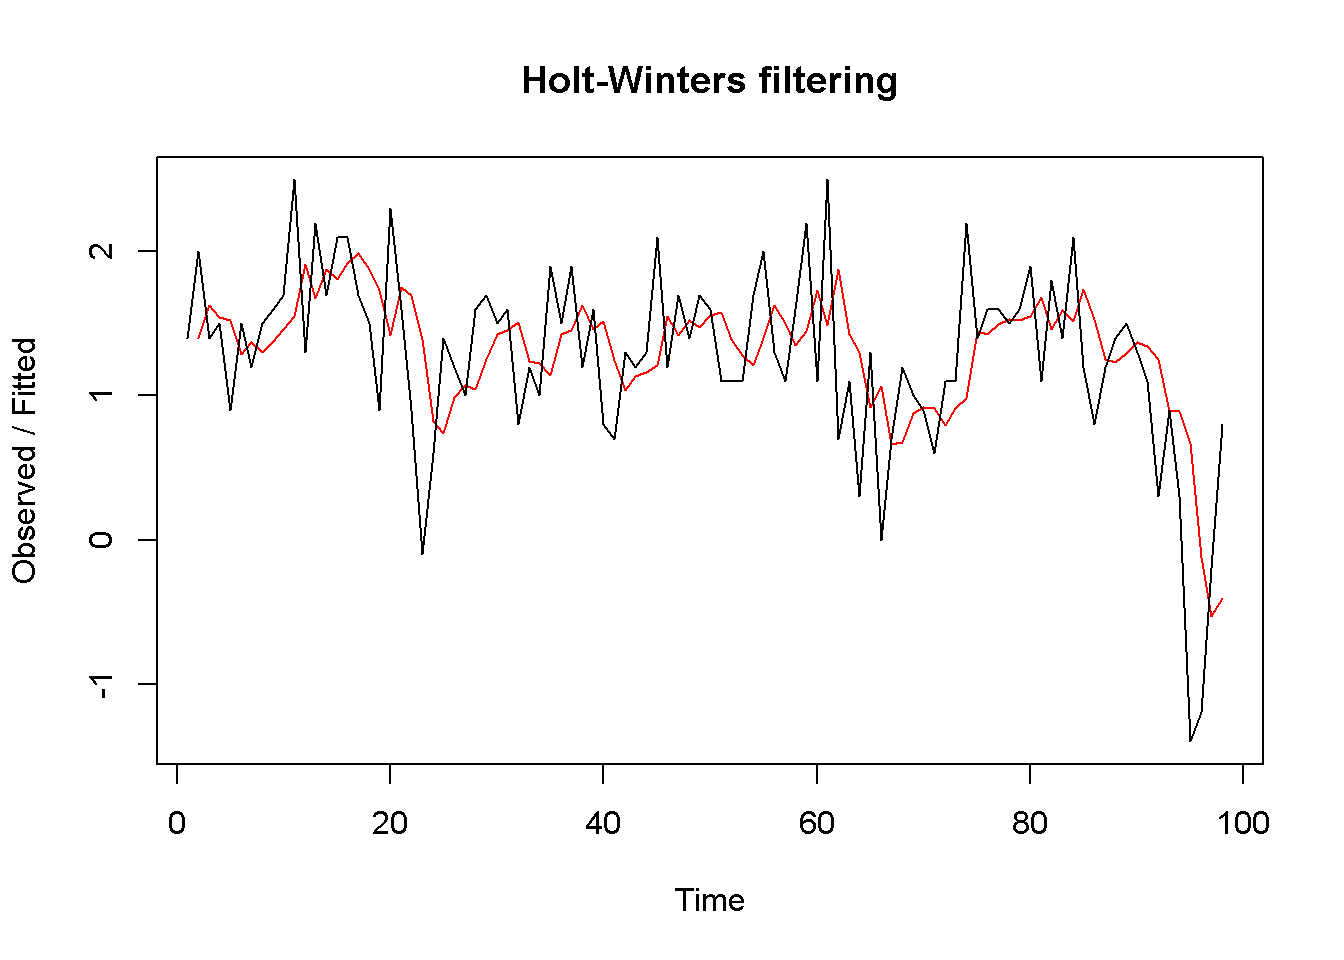 Exponential smoothing forecast using 'HoltWinters'